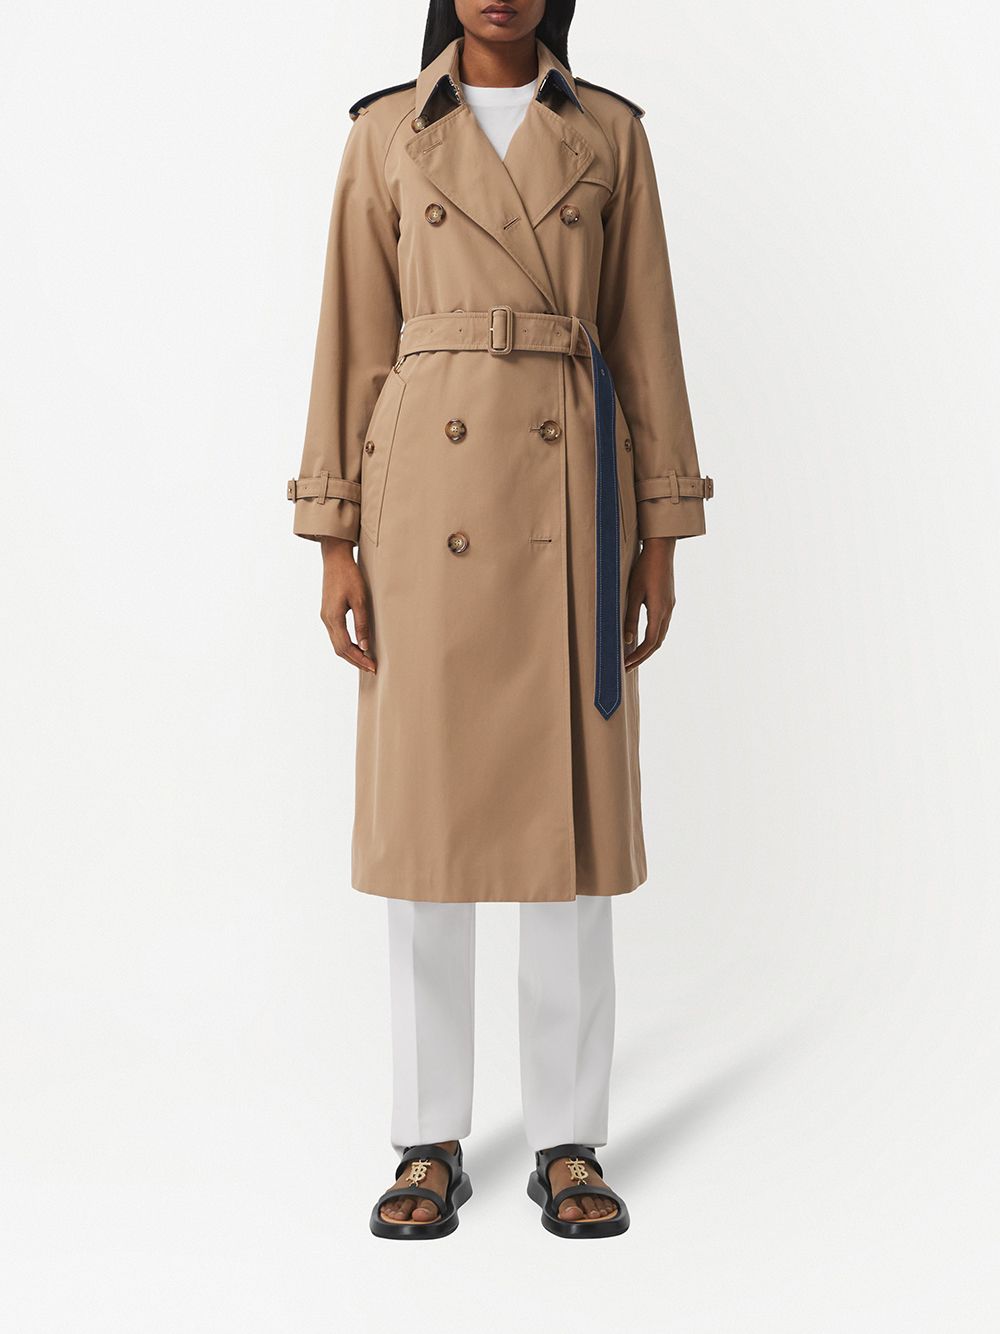 Burberry denim-detail Belted Trench Coat - Farfetch